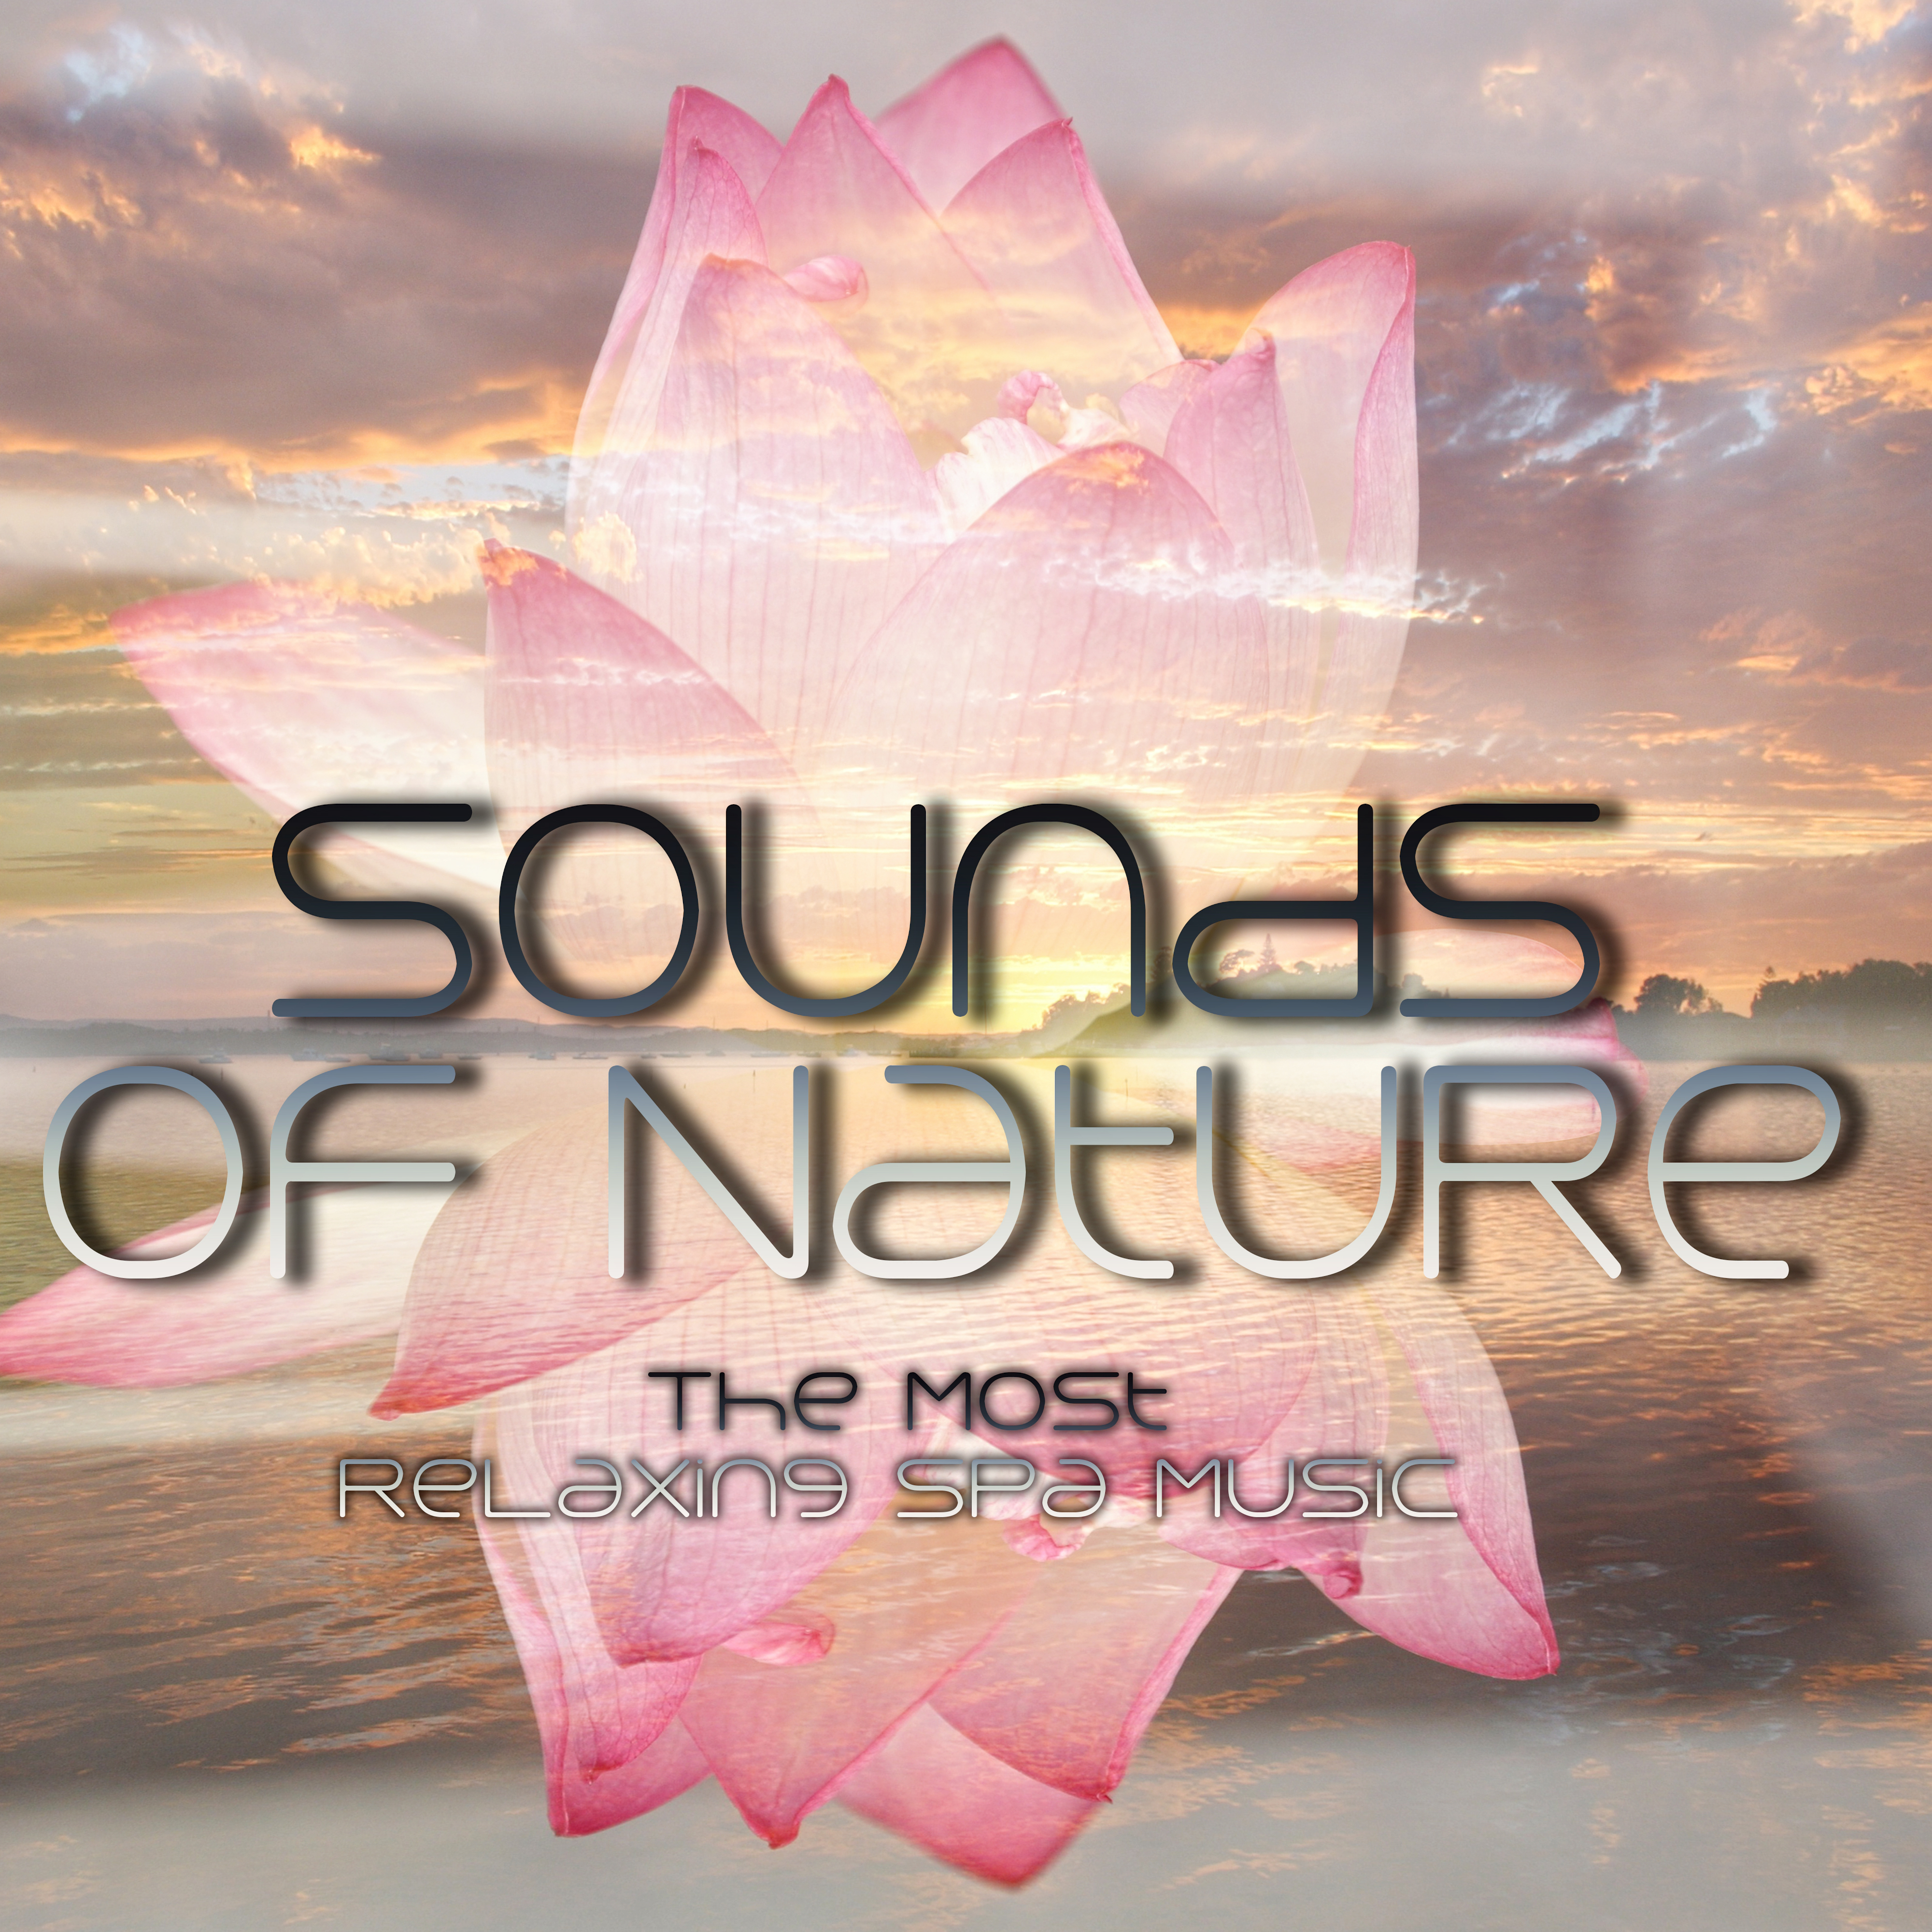 The Most Relaxing Spa Music - Sounds of Nature, New Age Music, Spa Music, Meditation, Sleep Music, Spa Dreams, Solo Piano New Age